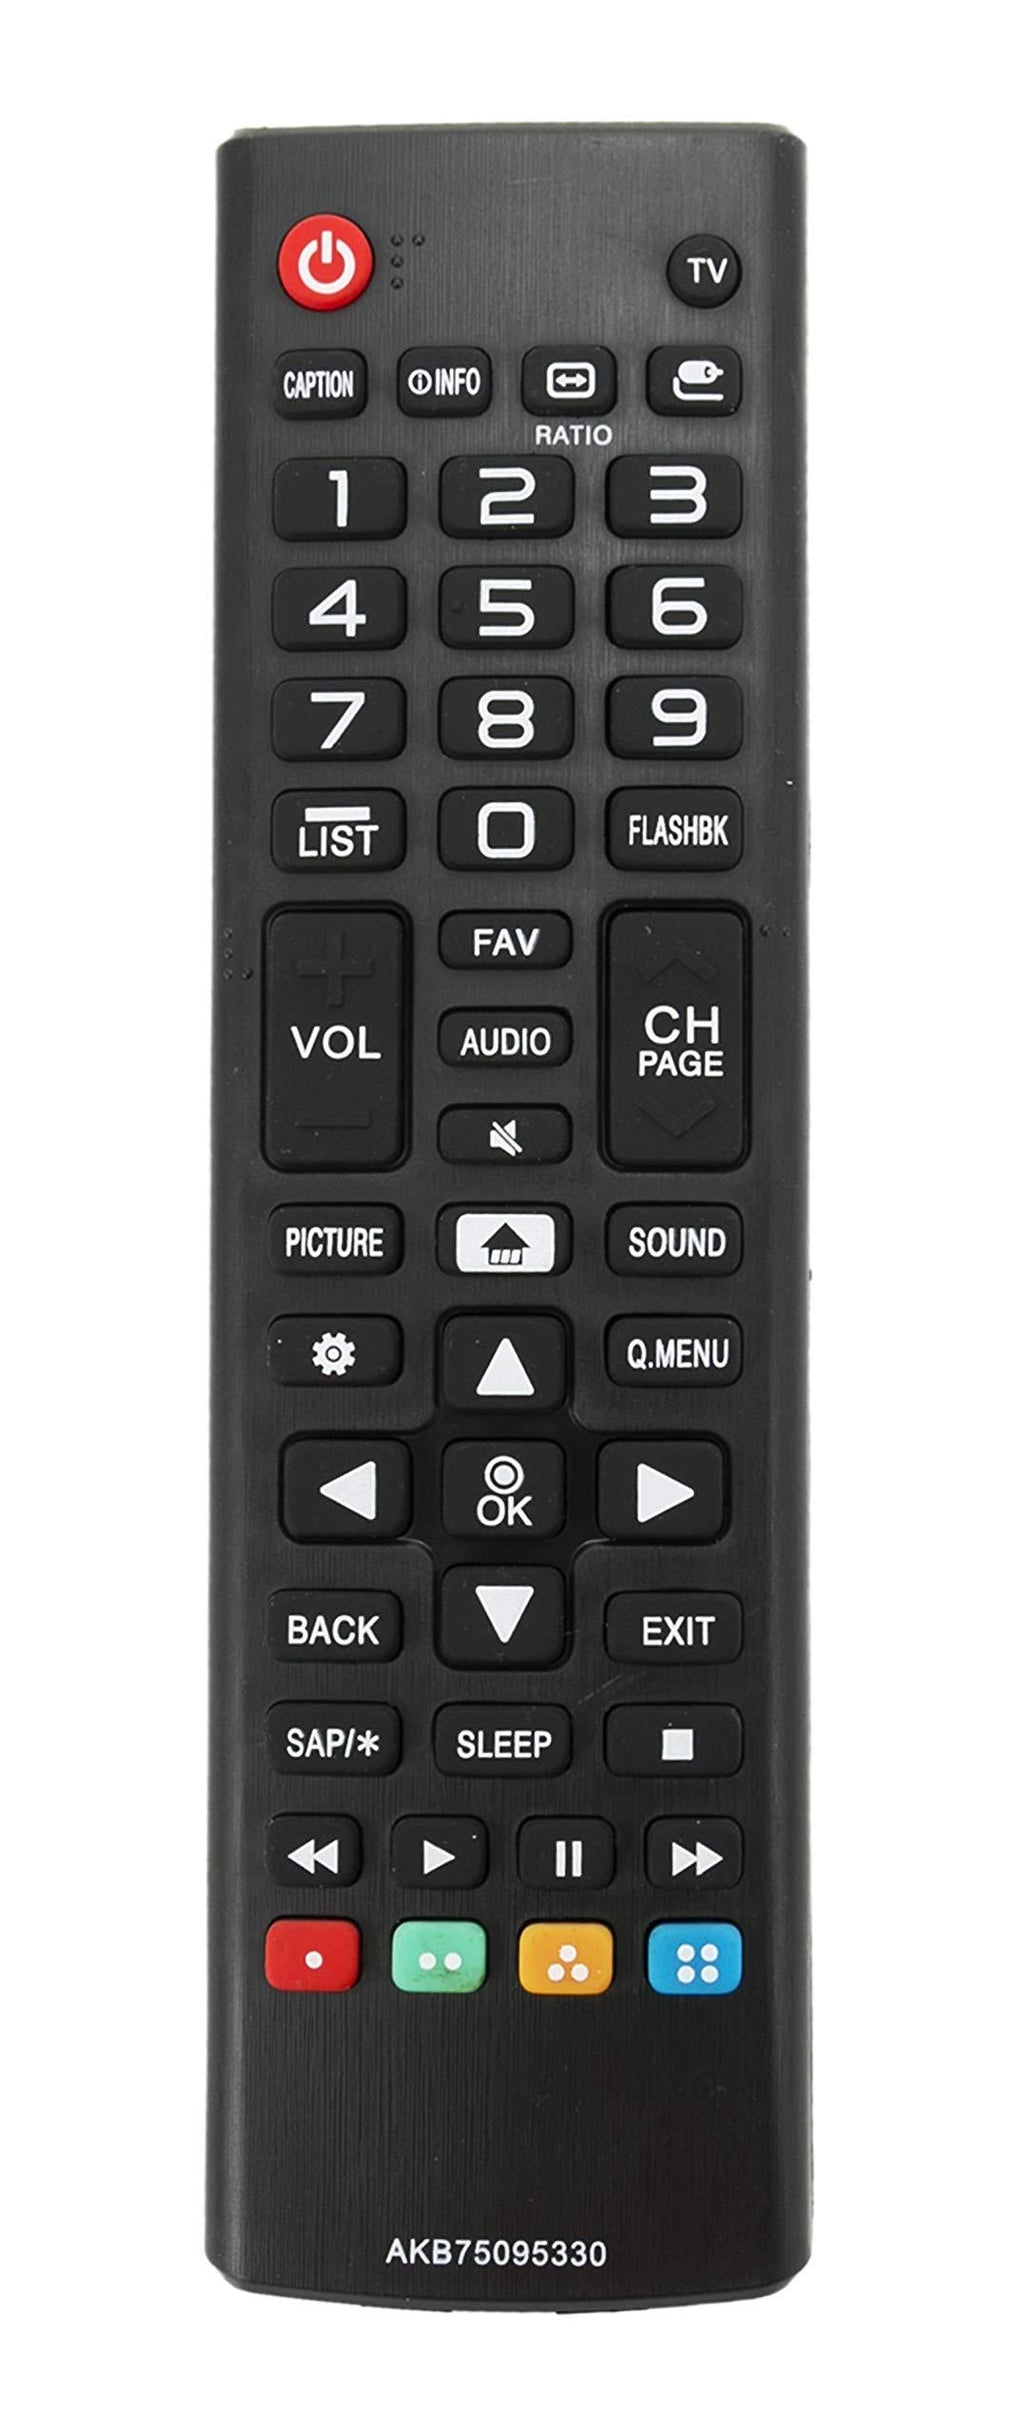 New AKB75095330 Replace Remote Control fit for LG 28MT42DF 28LJ400B 43LJ5000 43LJ500M 32LJ500B 28LJ400B-PU 32LJ500UB 32LJ500-UBLED 28LJ430B 28LJ400B-PU 32LJ500B-UB 43LJ5000-UB 43LJ500M-UB LCD TV - LeoForward Australia